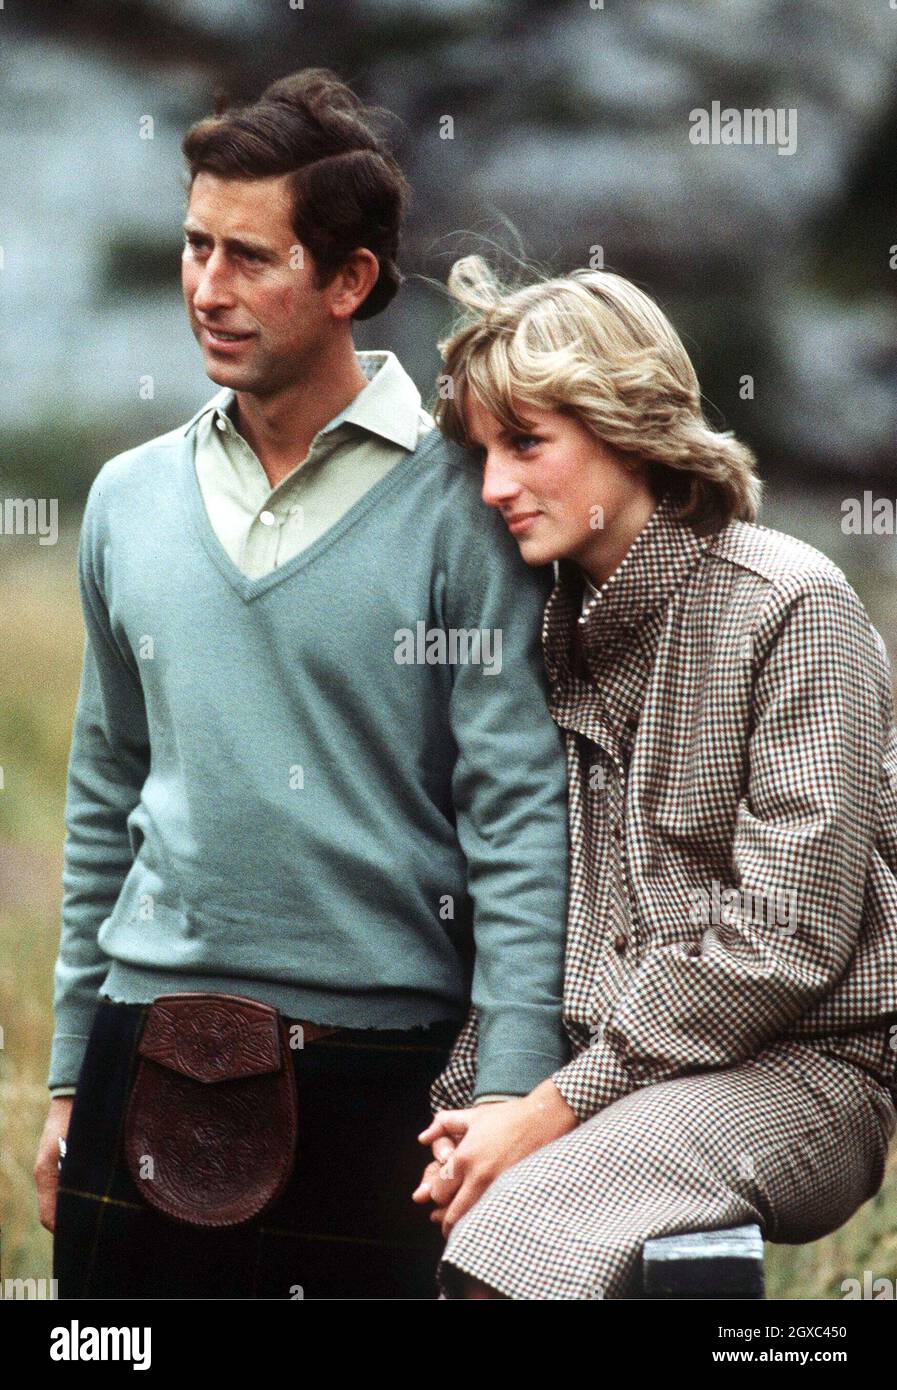 Prince Charles, Prince of Wales and Diana, Princess of Wales pose of the press on their honeymoon at Balmoral in Scotland in August 1981. Stock Photo